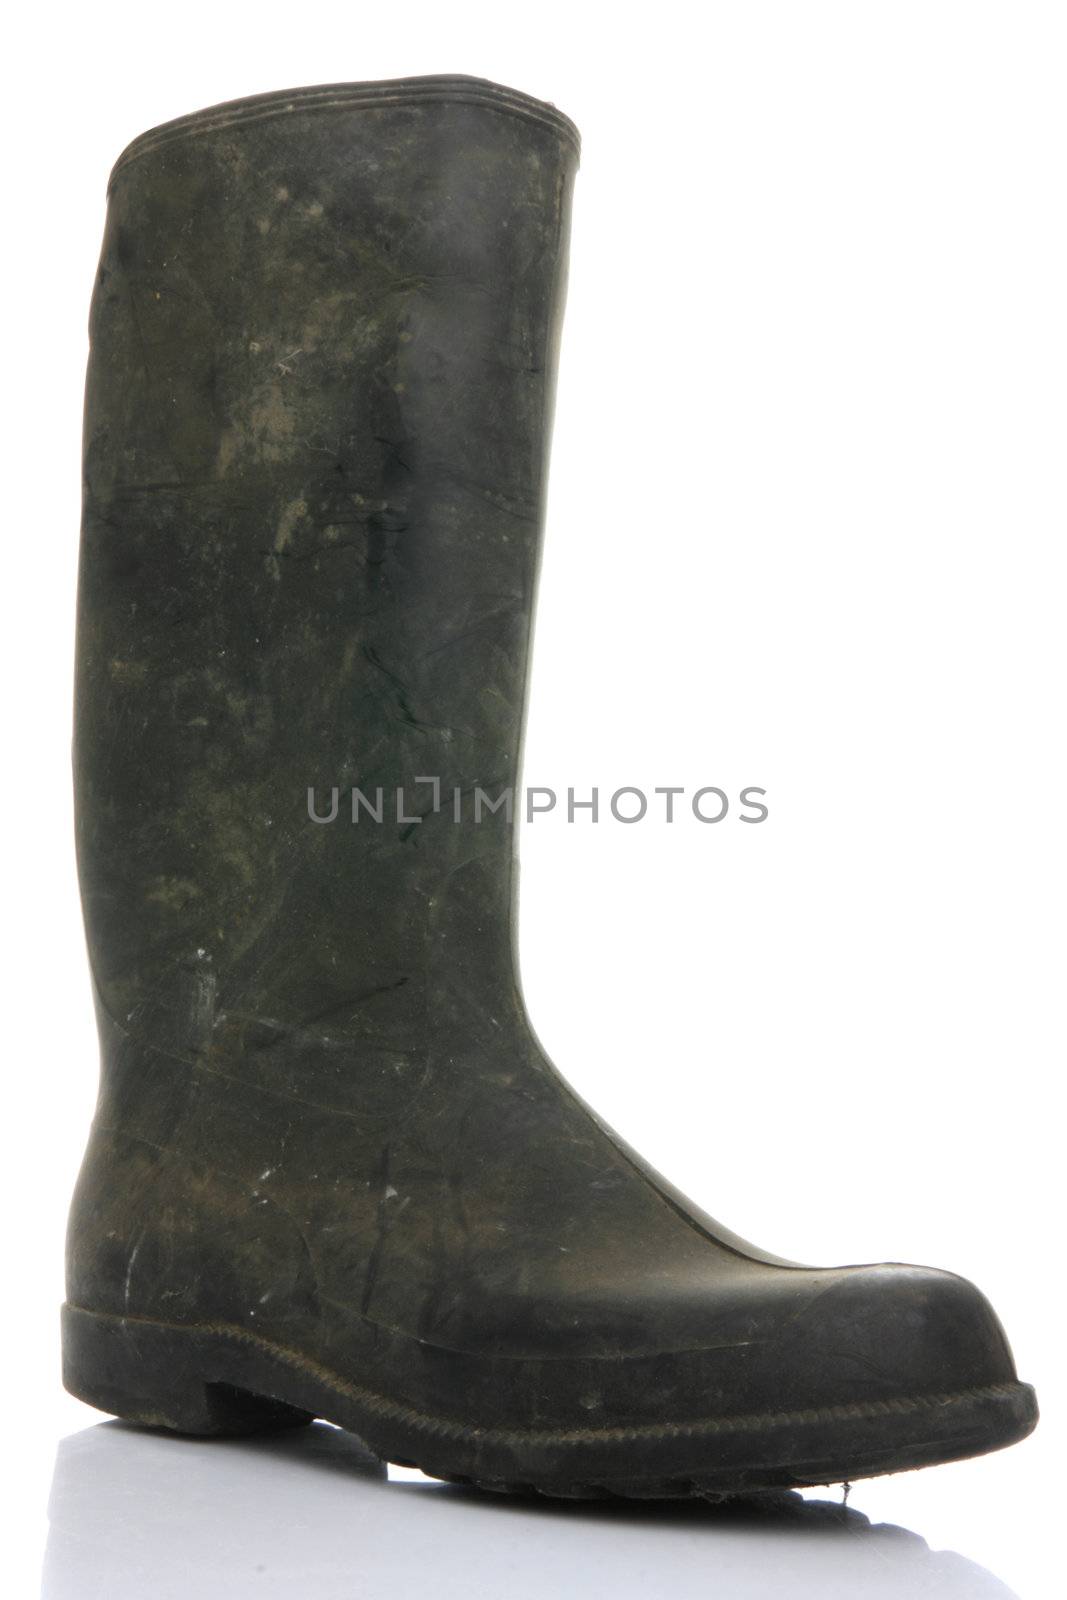 Rubber dirty boot isolated on white